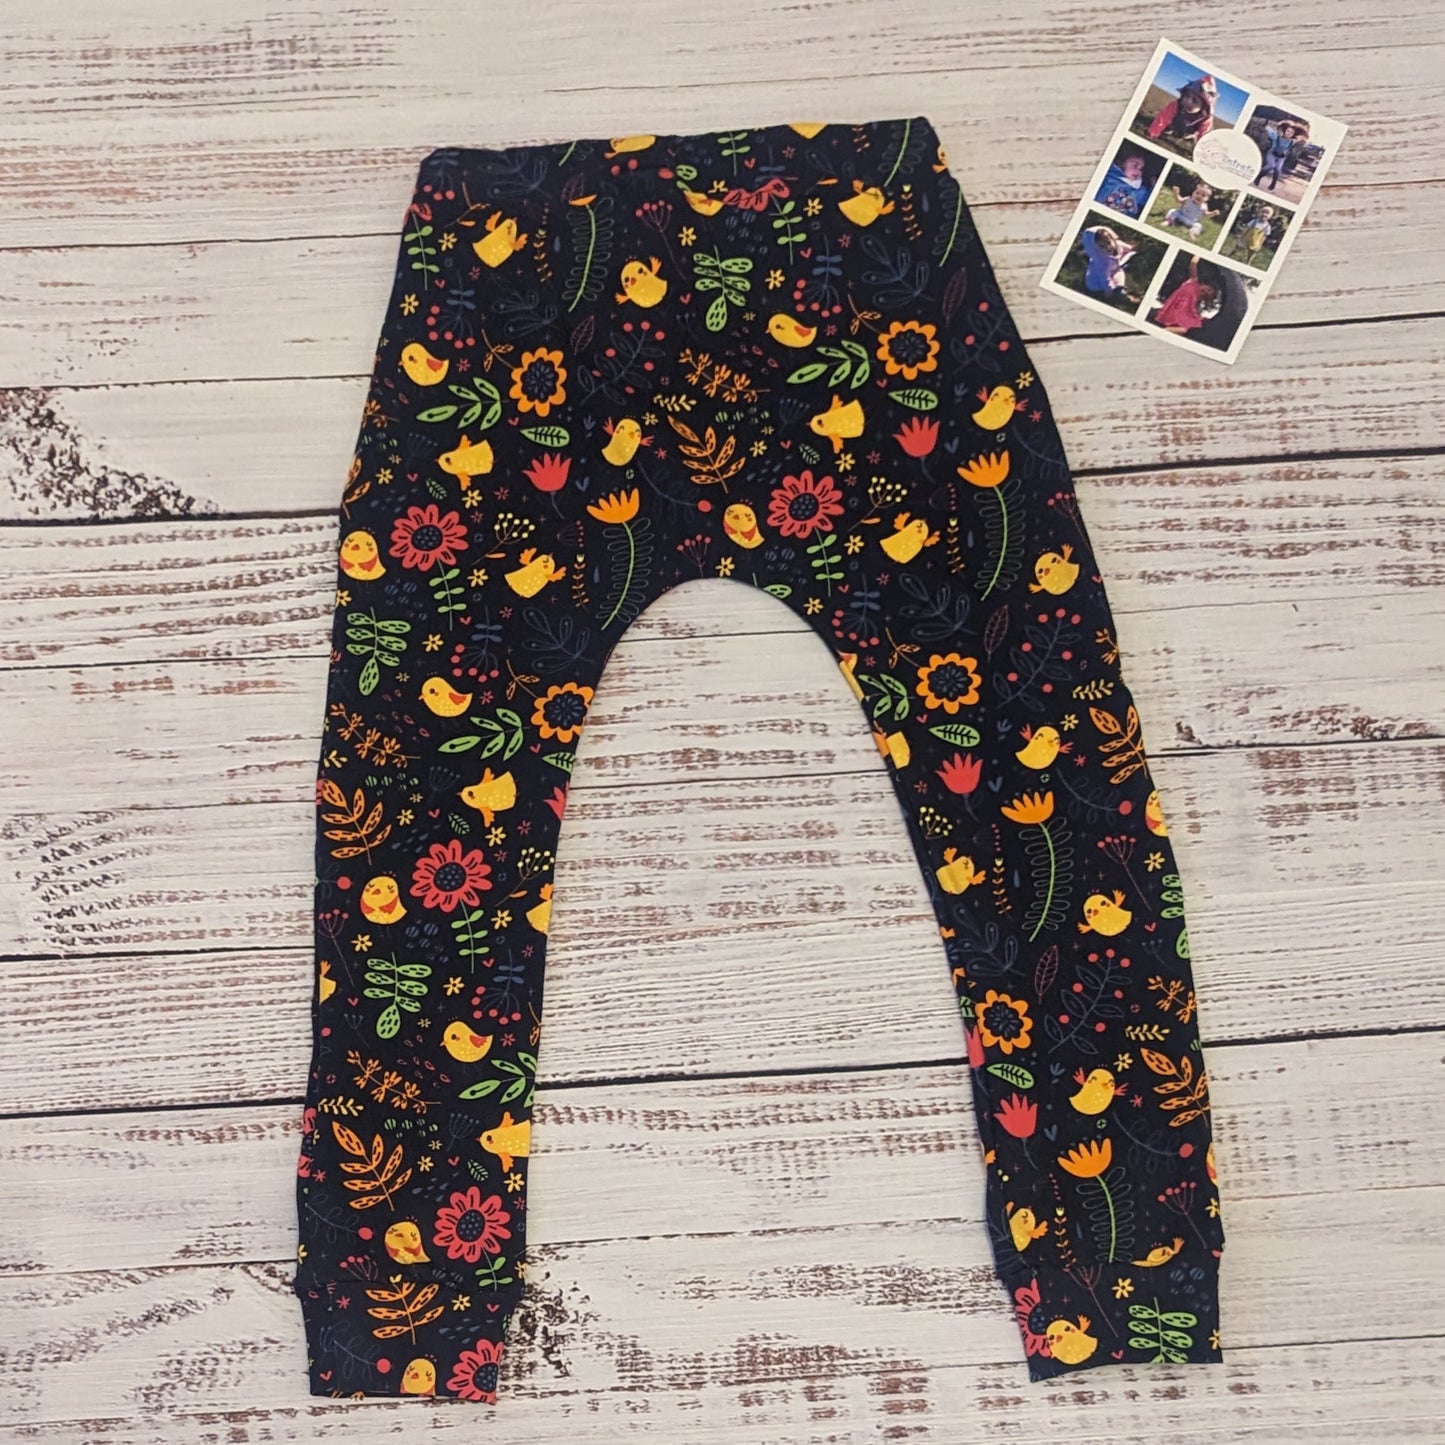 Vibrant and fun flowery chicks kids harem joggers. Handmade using navy chicks cotton jersey. Shown from the rear.